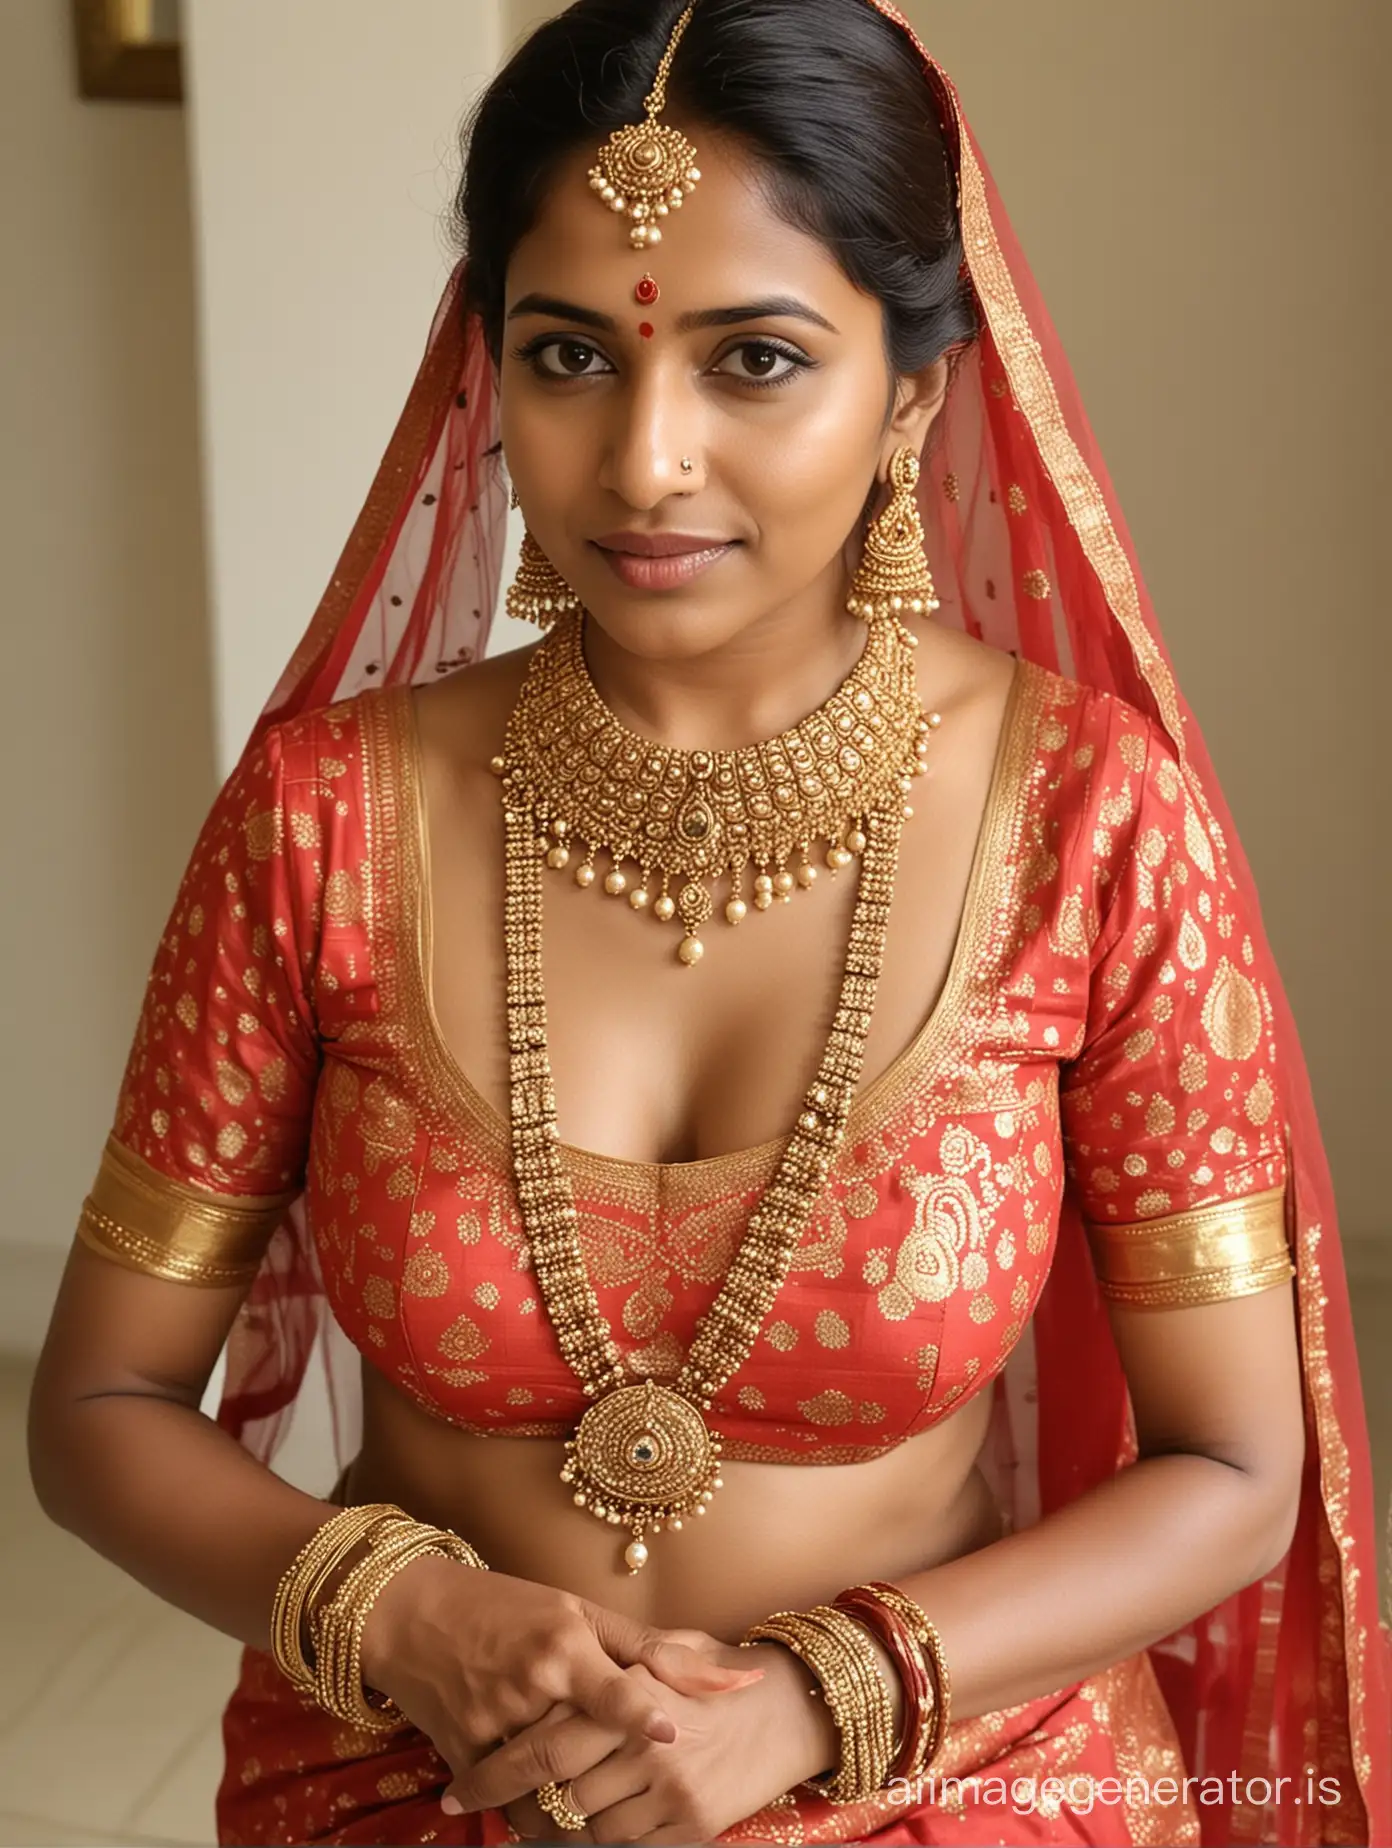 Elegant-South-Indian-Bride-Radiant-Beauty-in-Traditional-Wedding-Attire